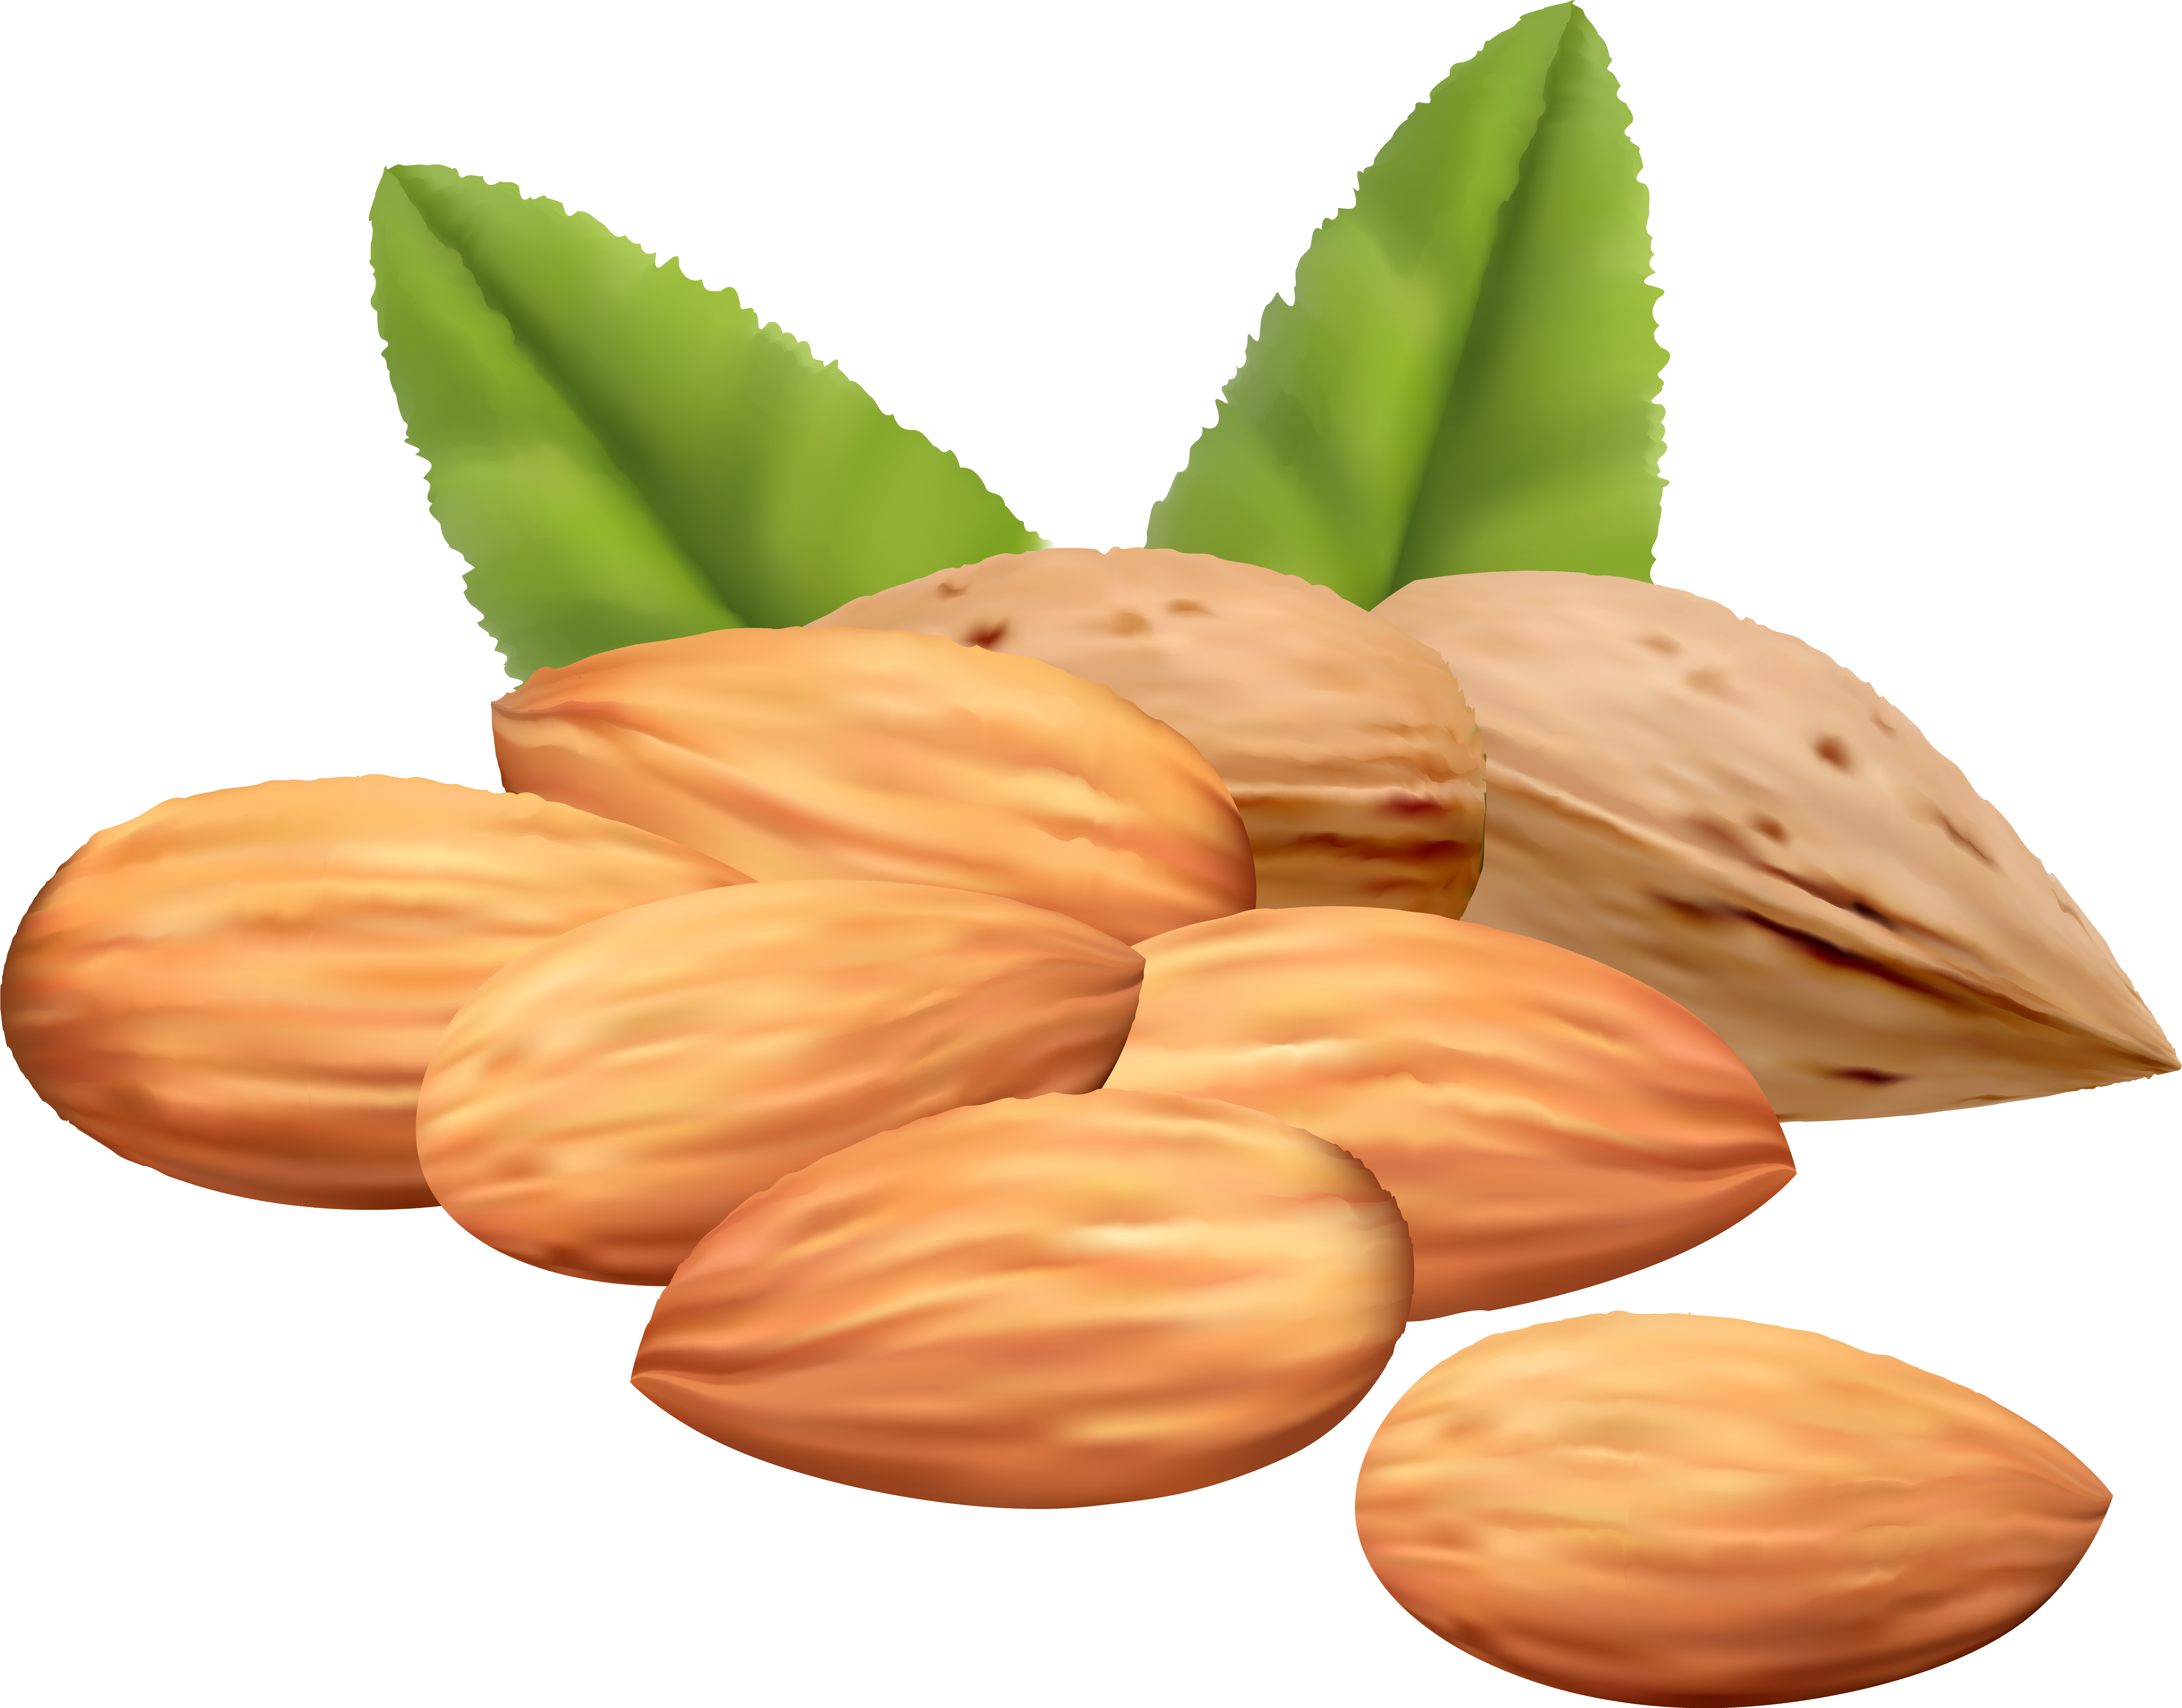 Almond Nuts Png Clipart Image - Nuts And Their Names.